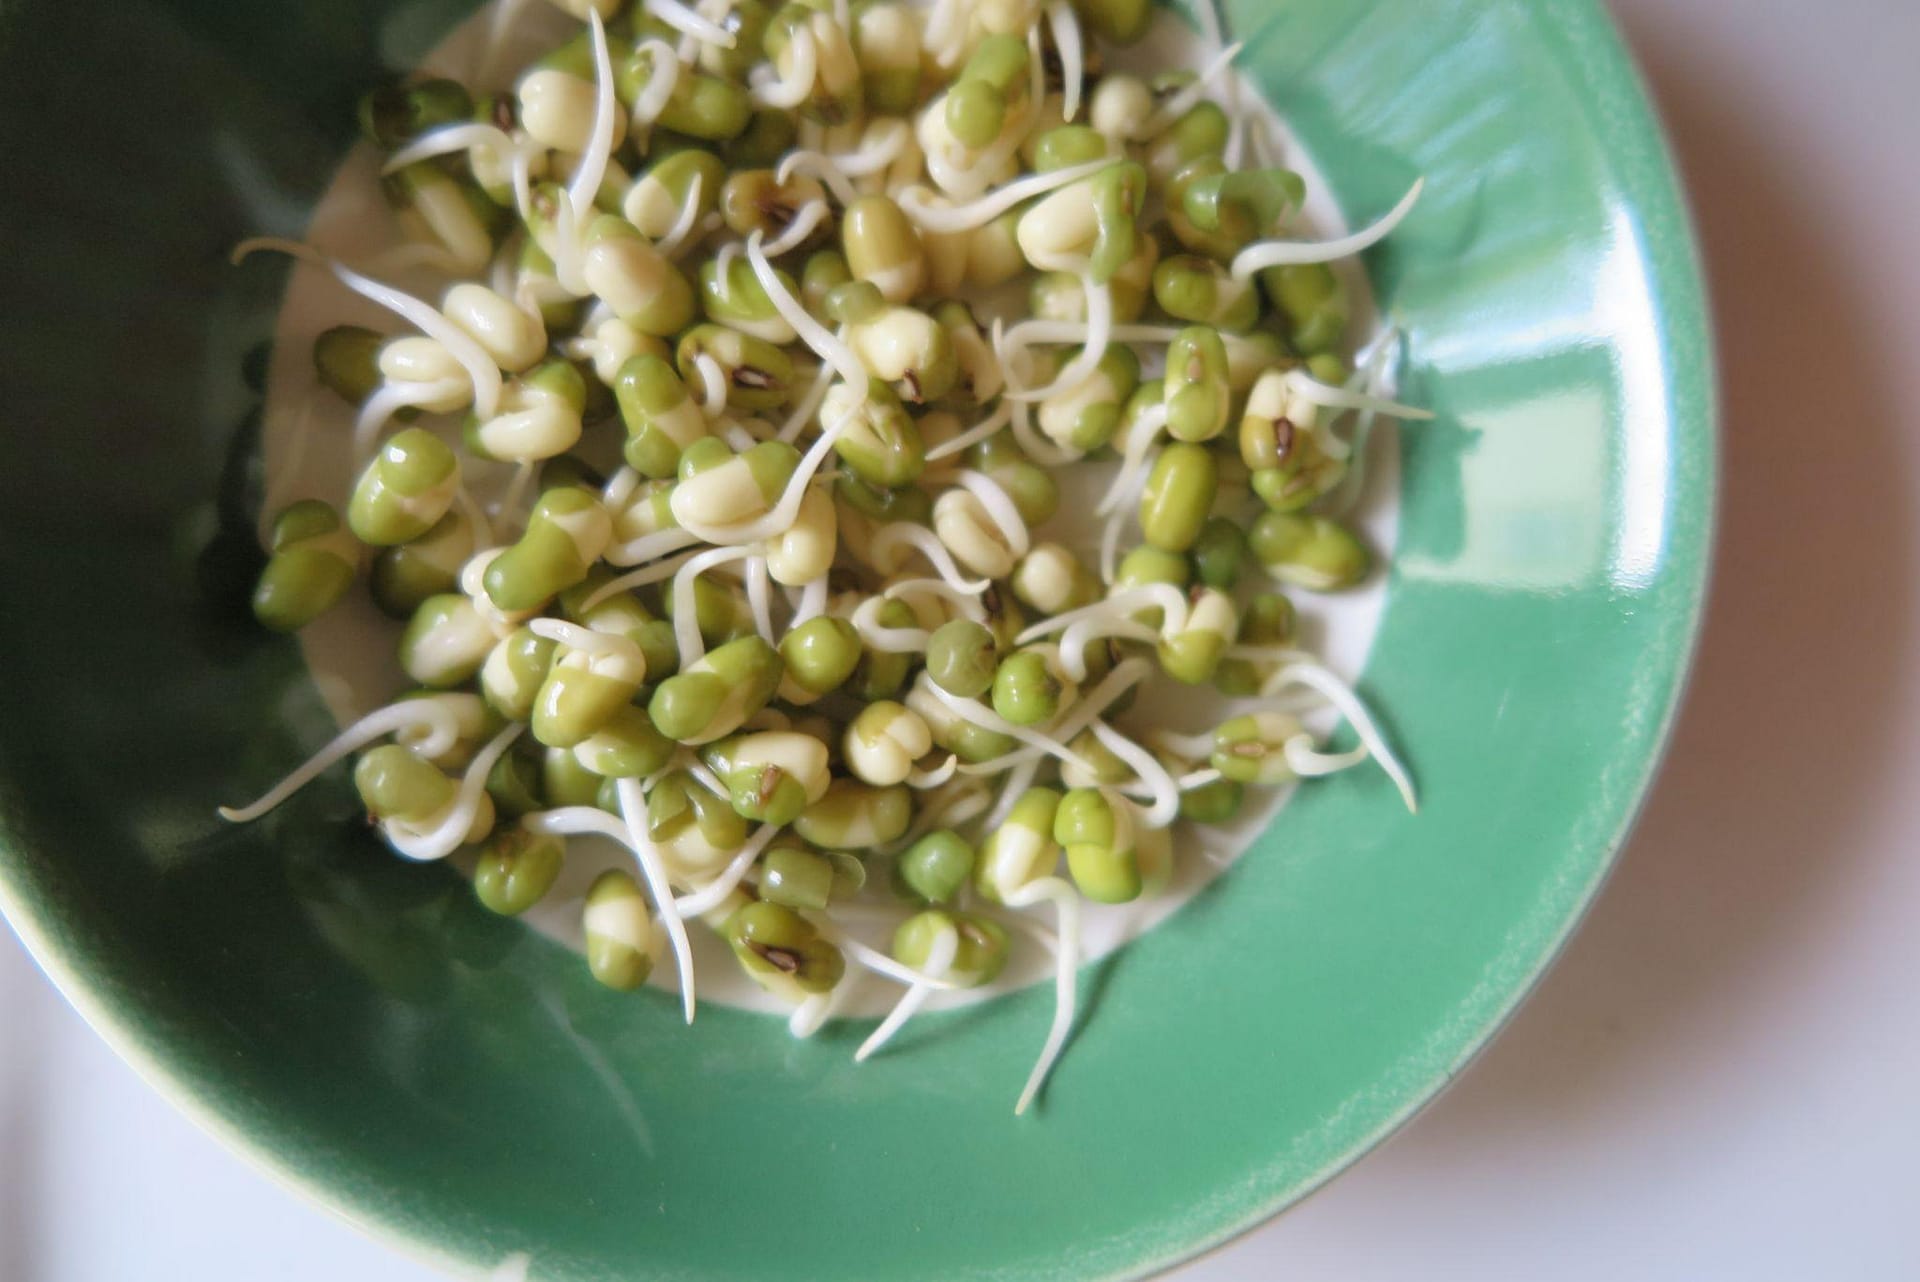 A seafoam green bowl with sprouted mung beans inside